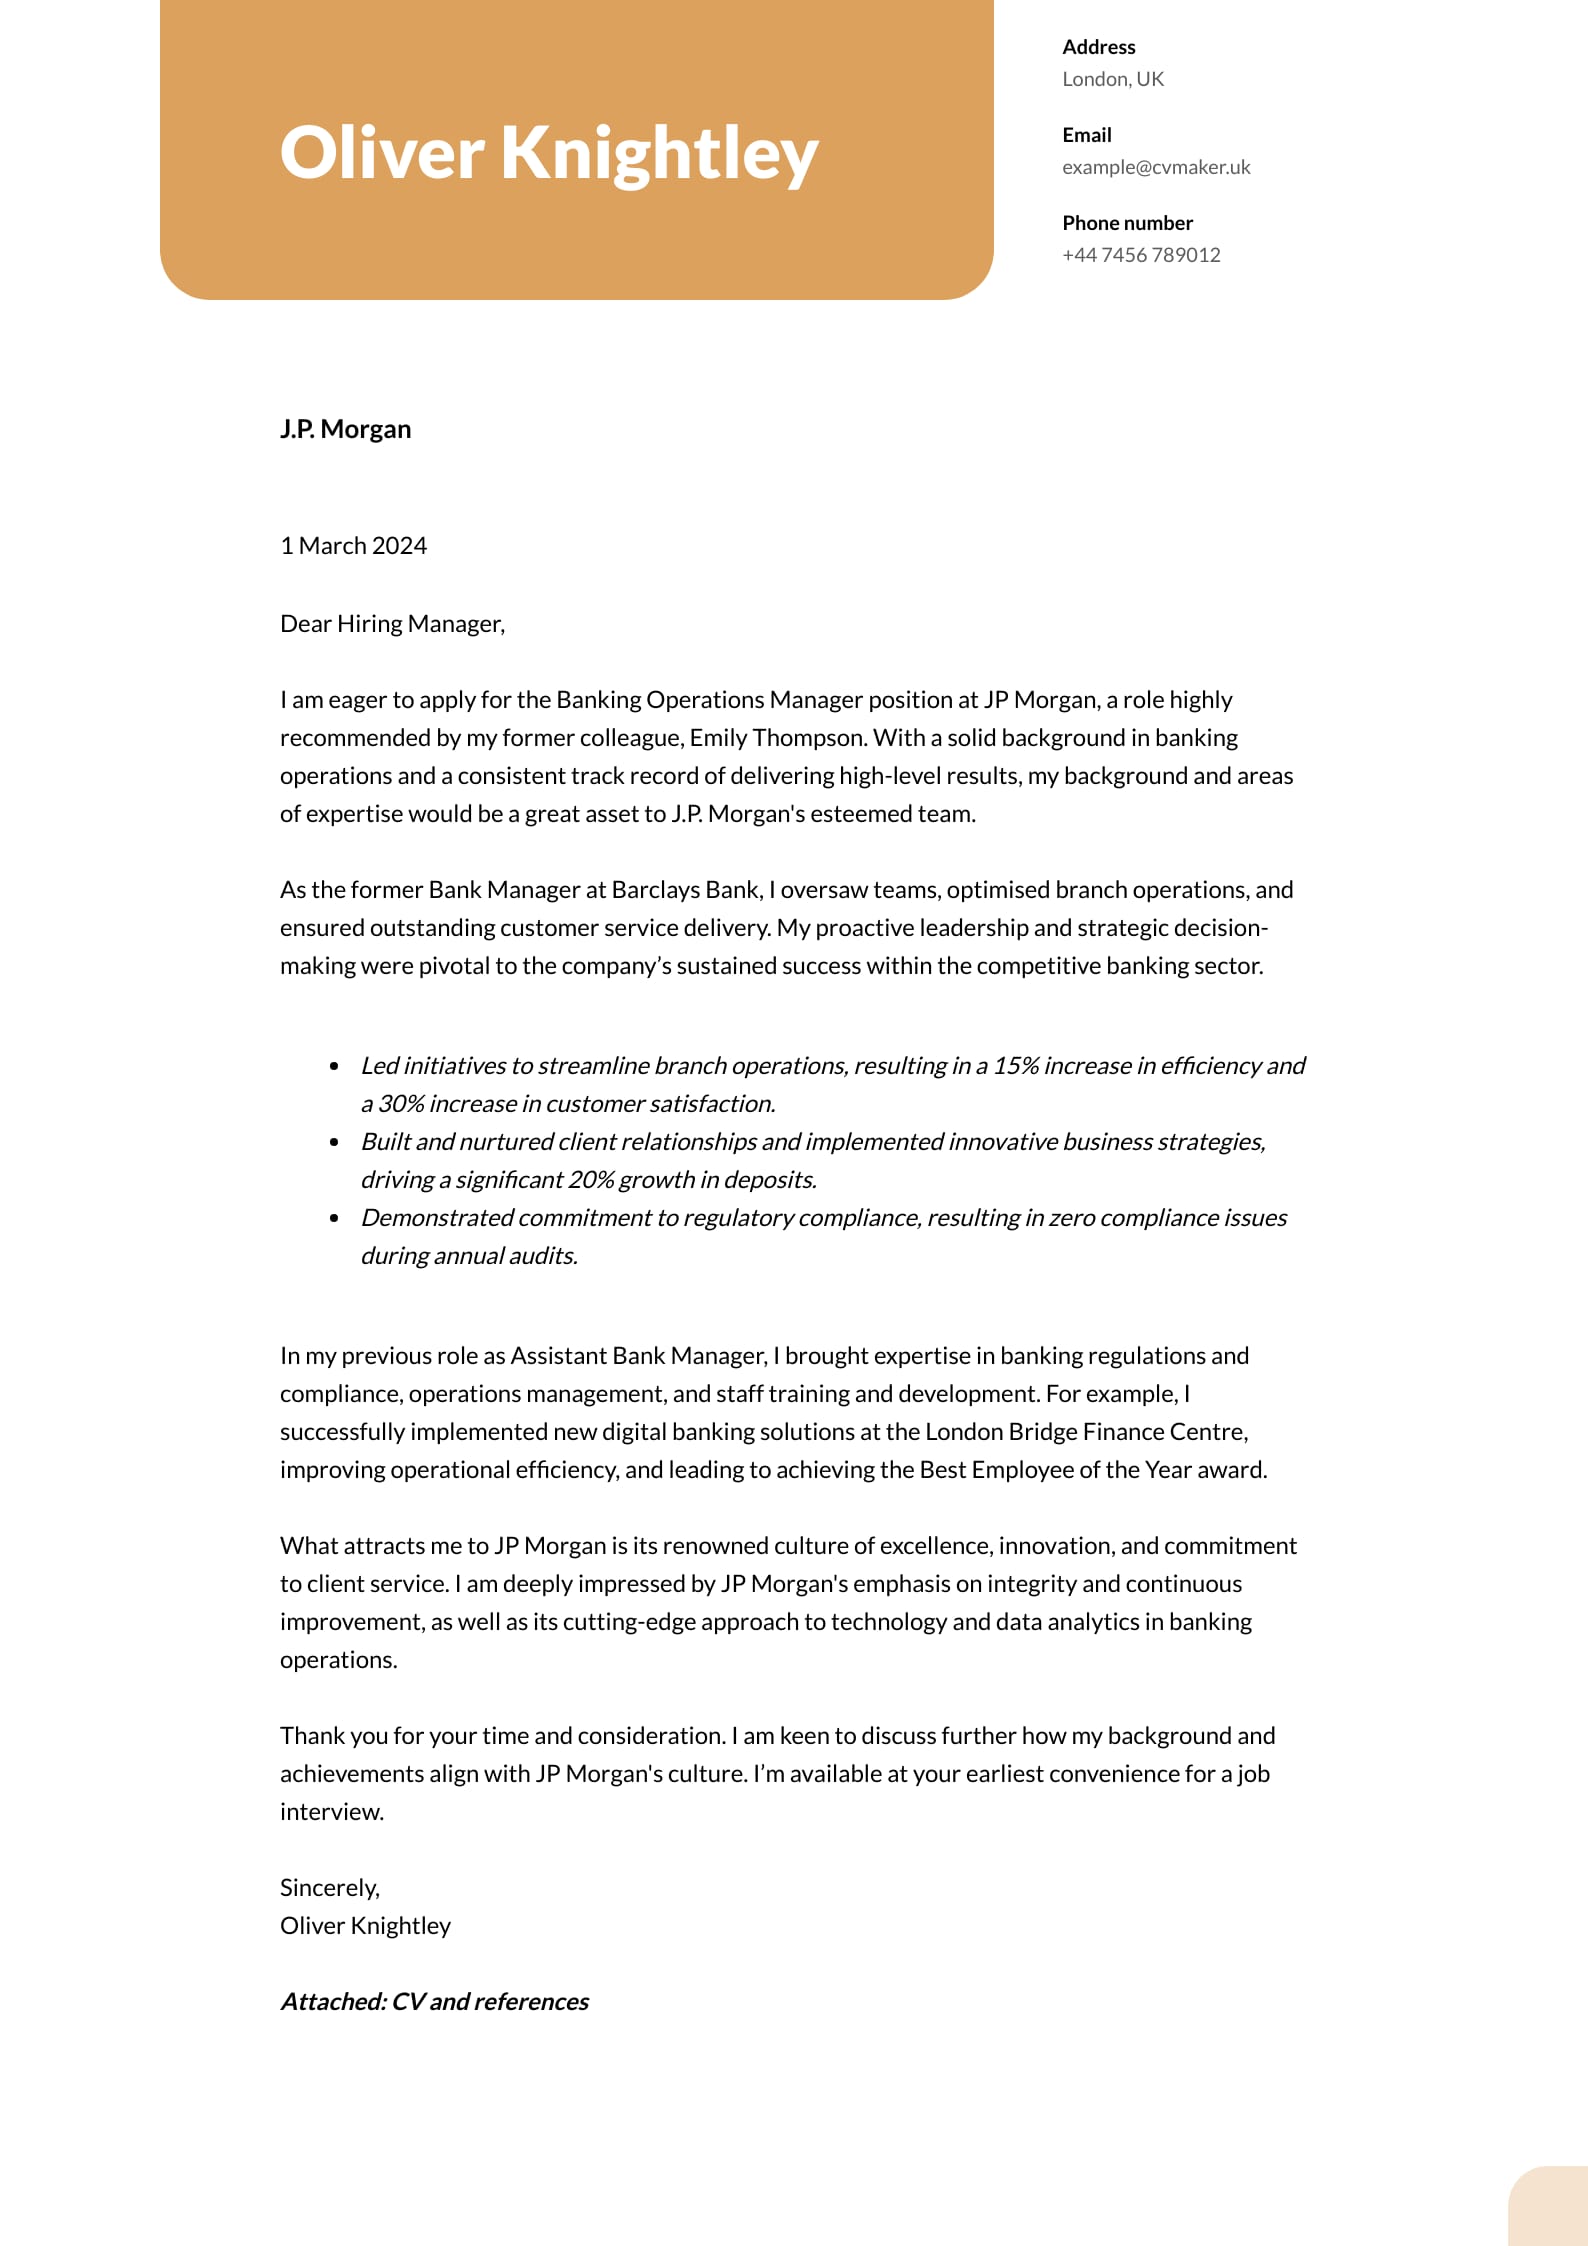 Cover Letter example - Banking - Columbia template